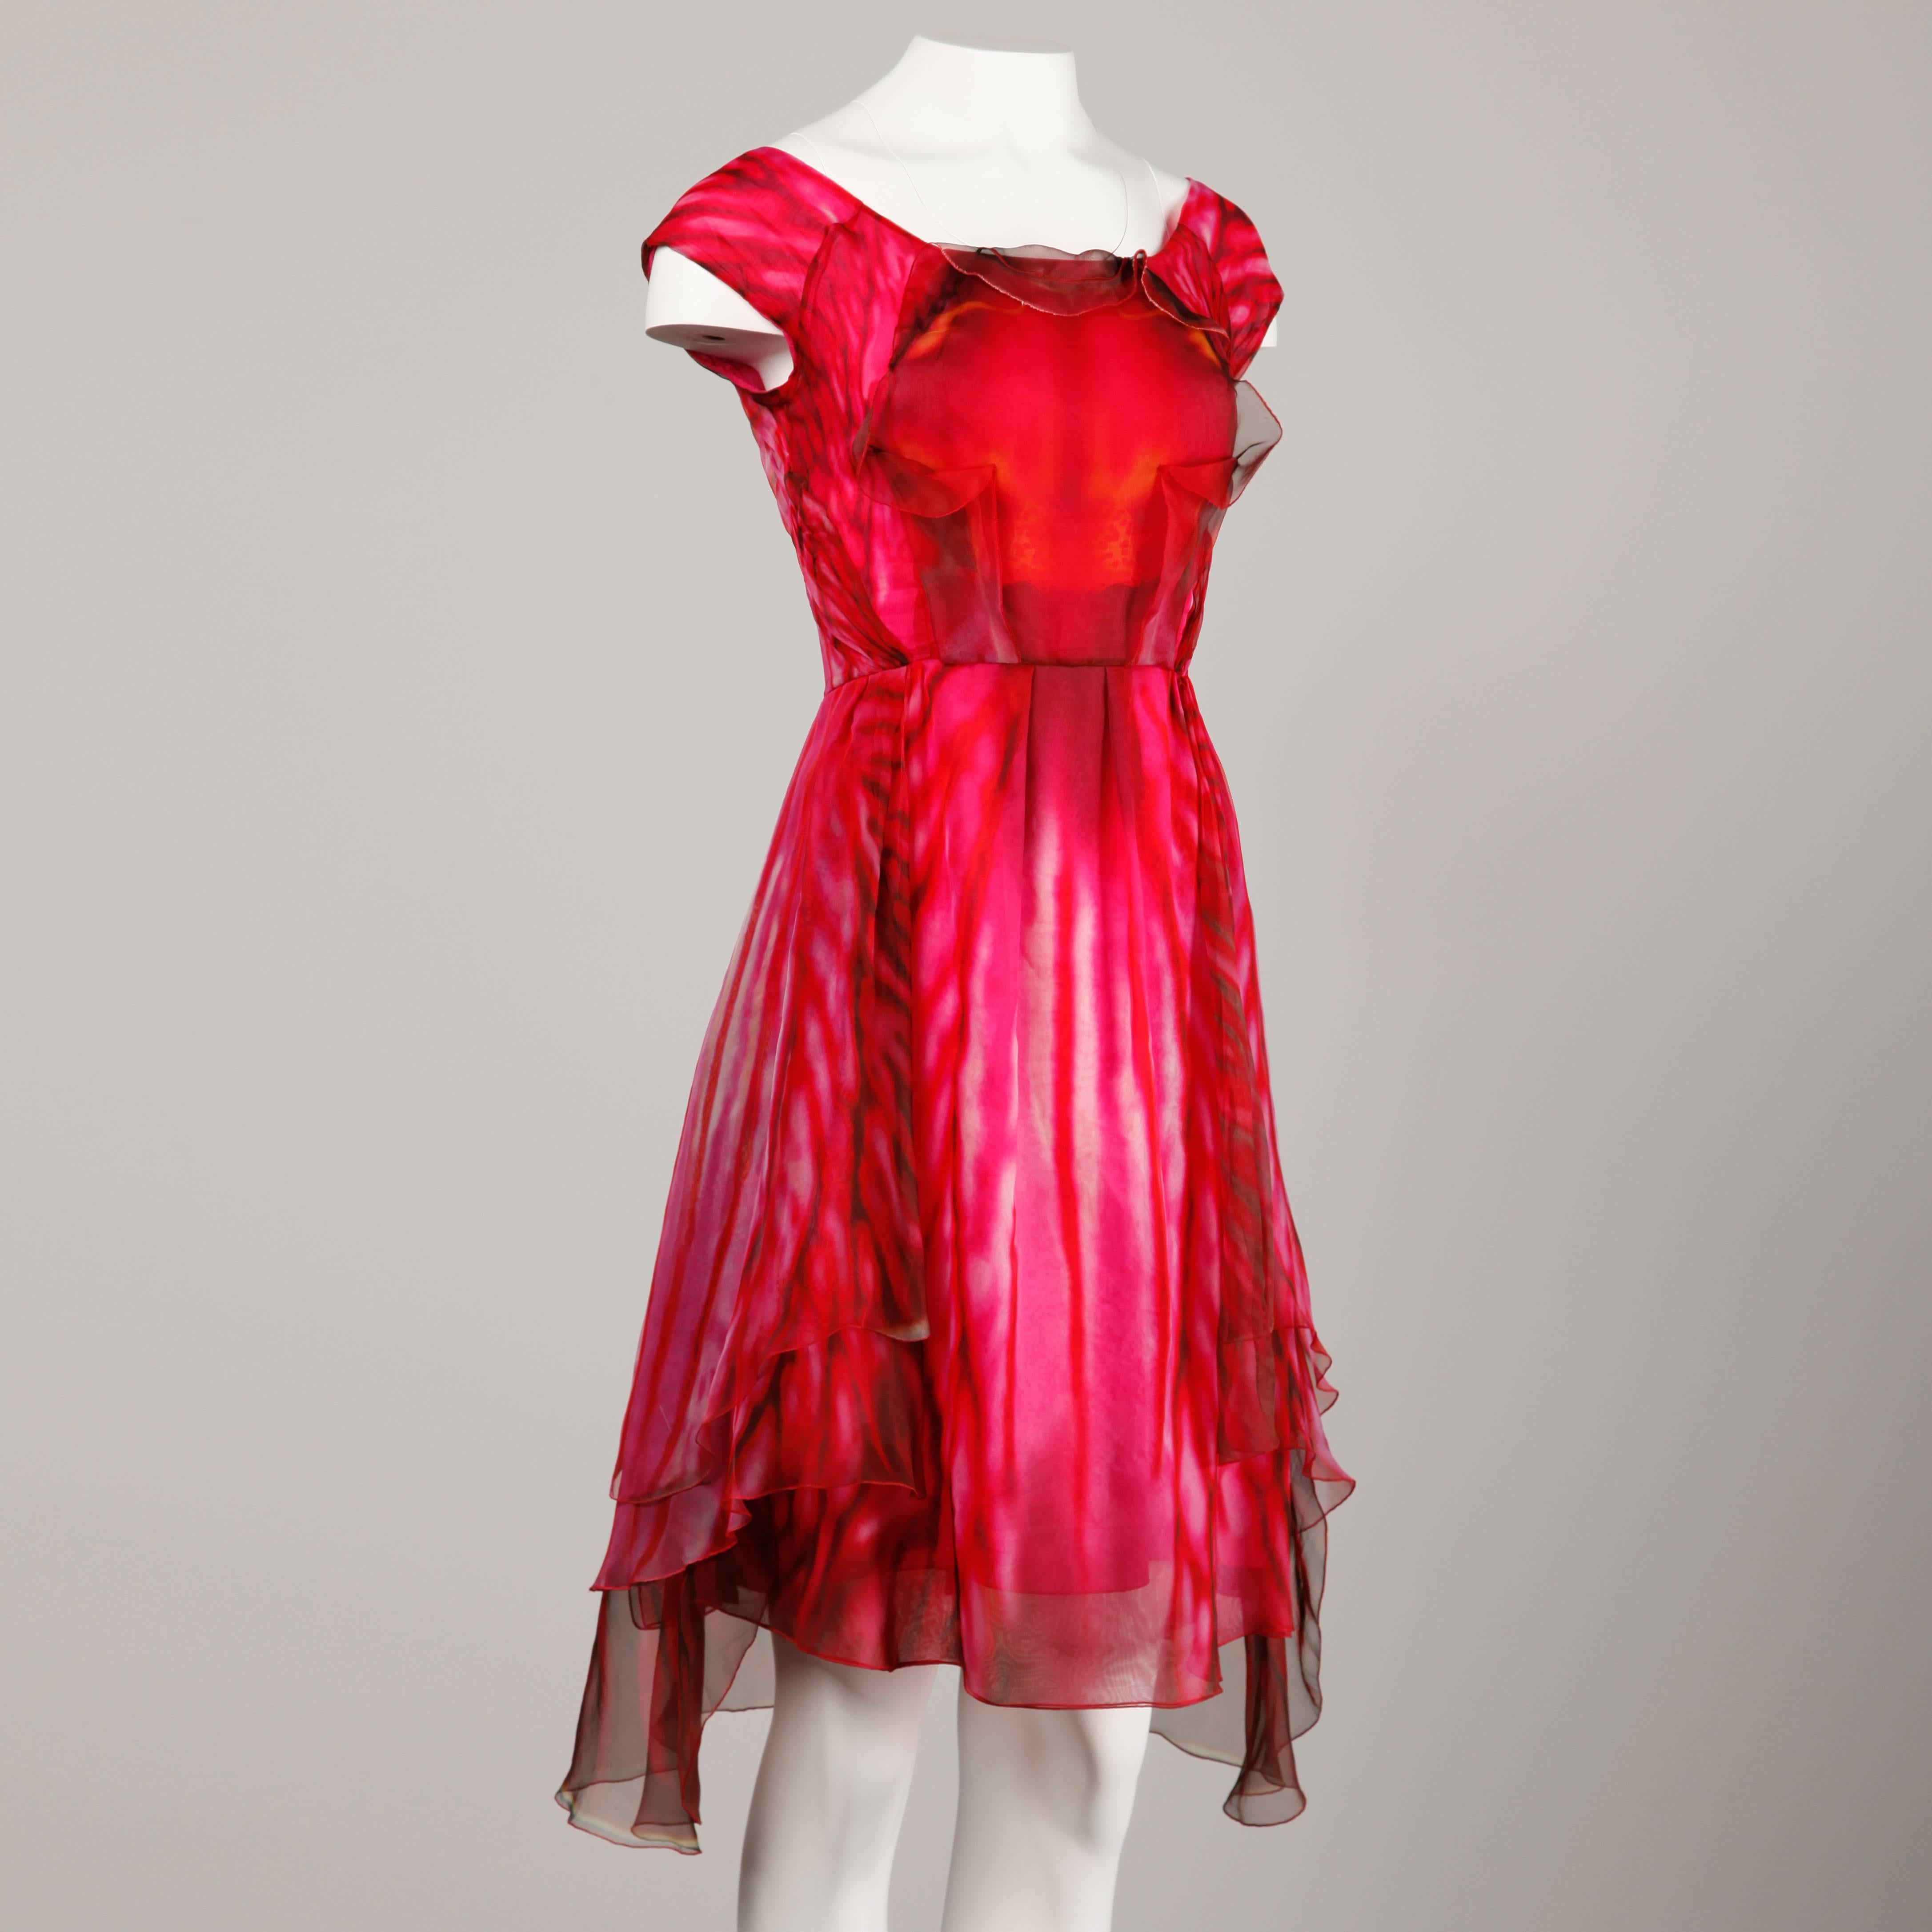 Incredible paper thin silk dress by Celine! Gorgeous orchid flower design in shades of fuchsia and pink silk. We have seen botanicals in fashion before but never quite like this!

Details: 

Fully Lined in Silk
Back Zip with Hook